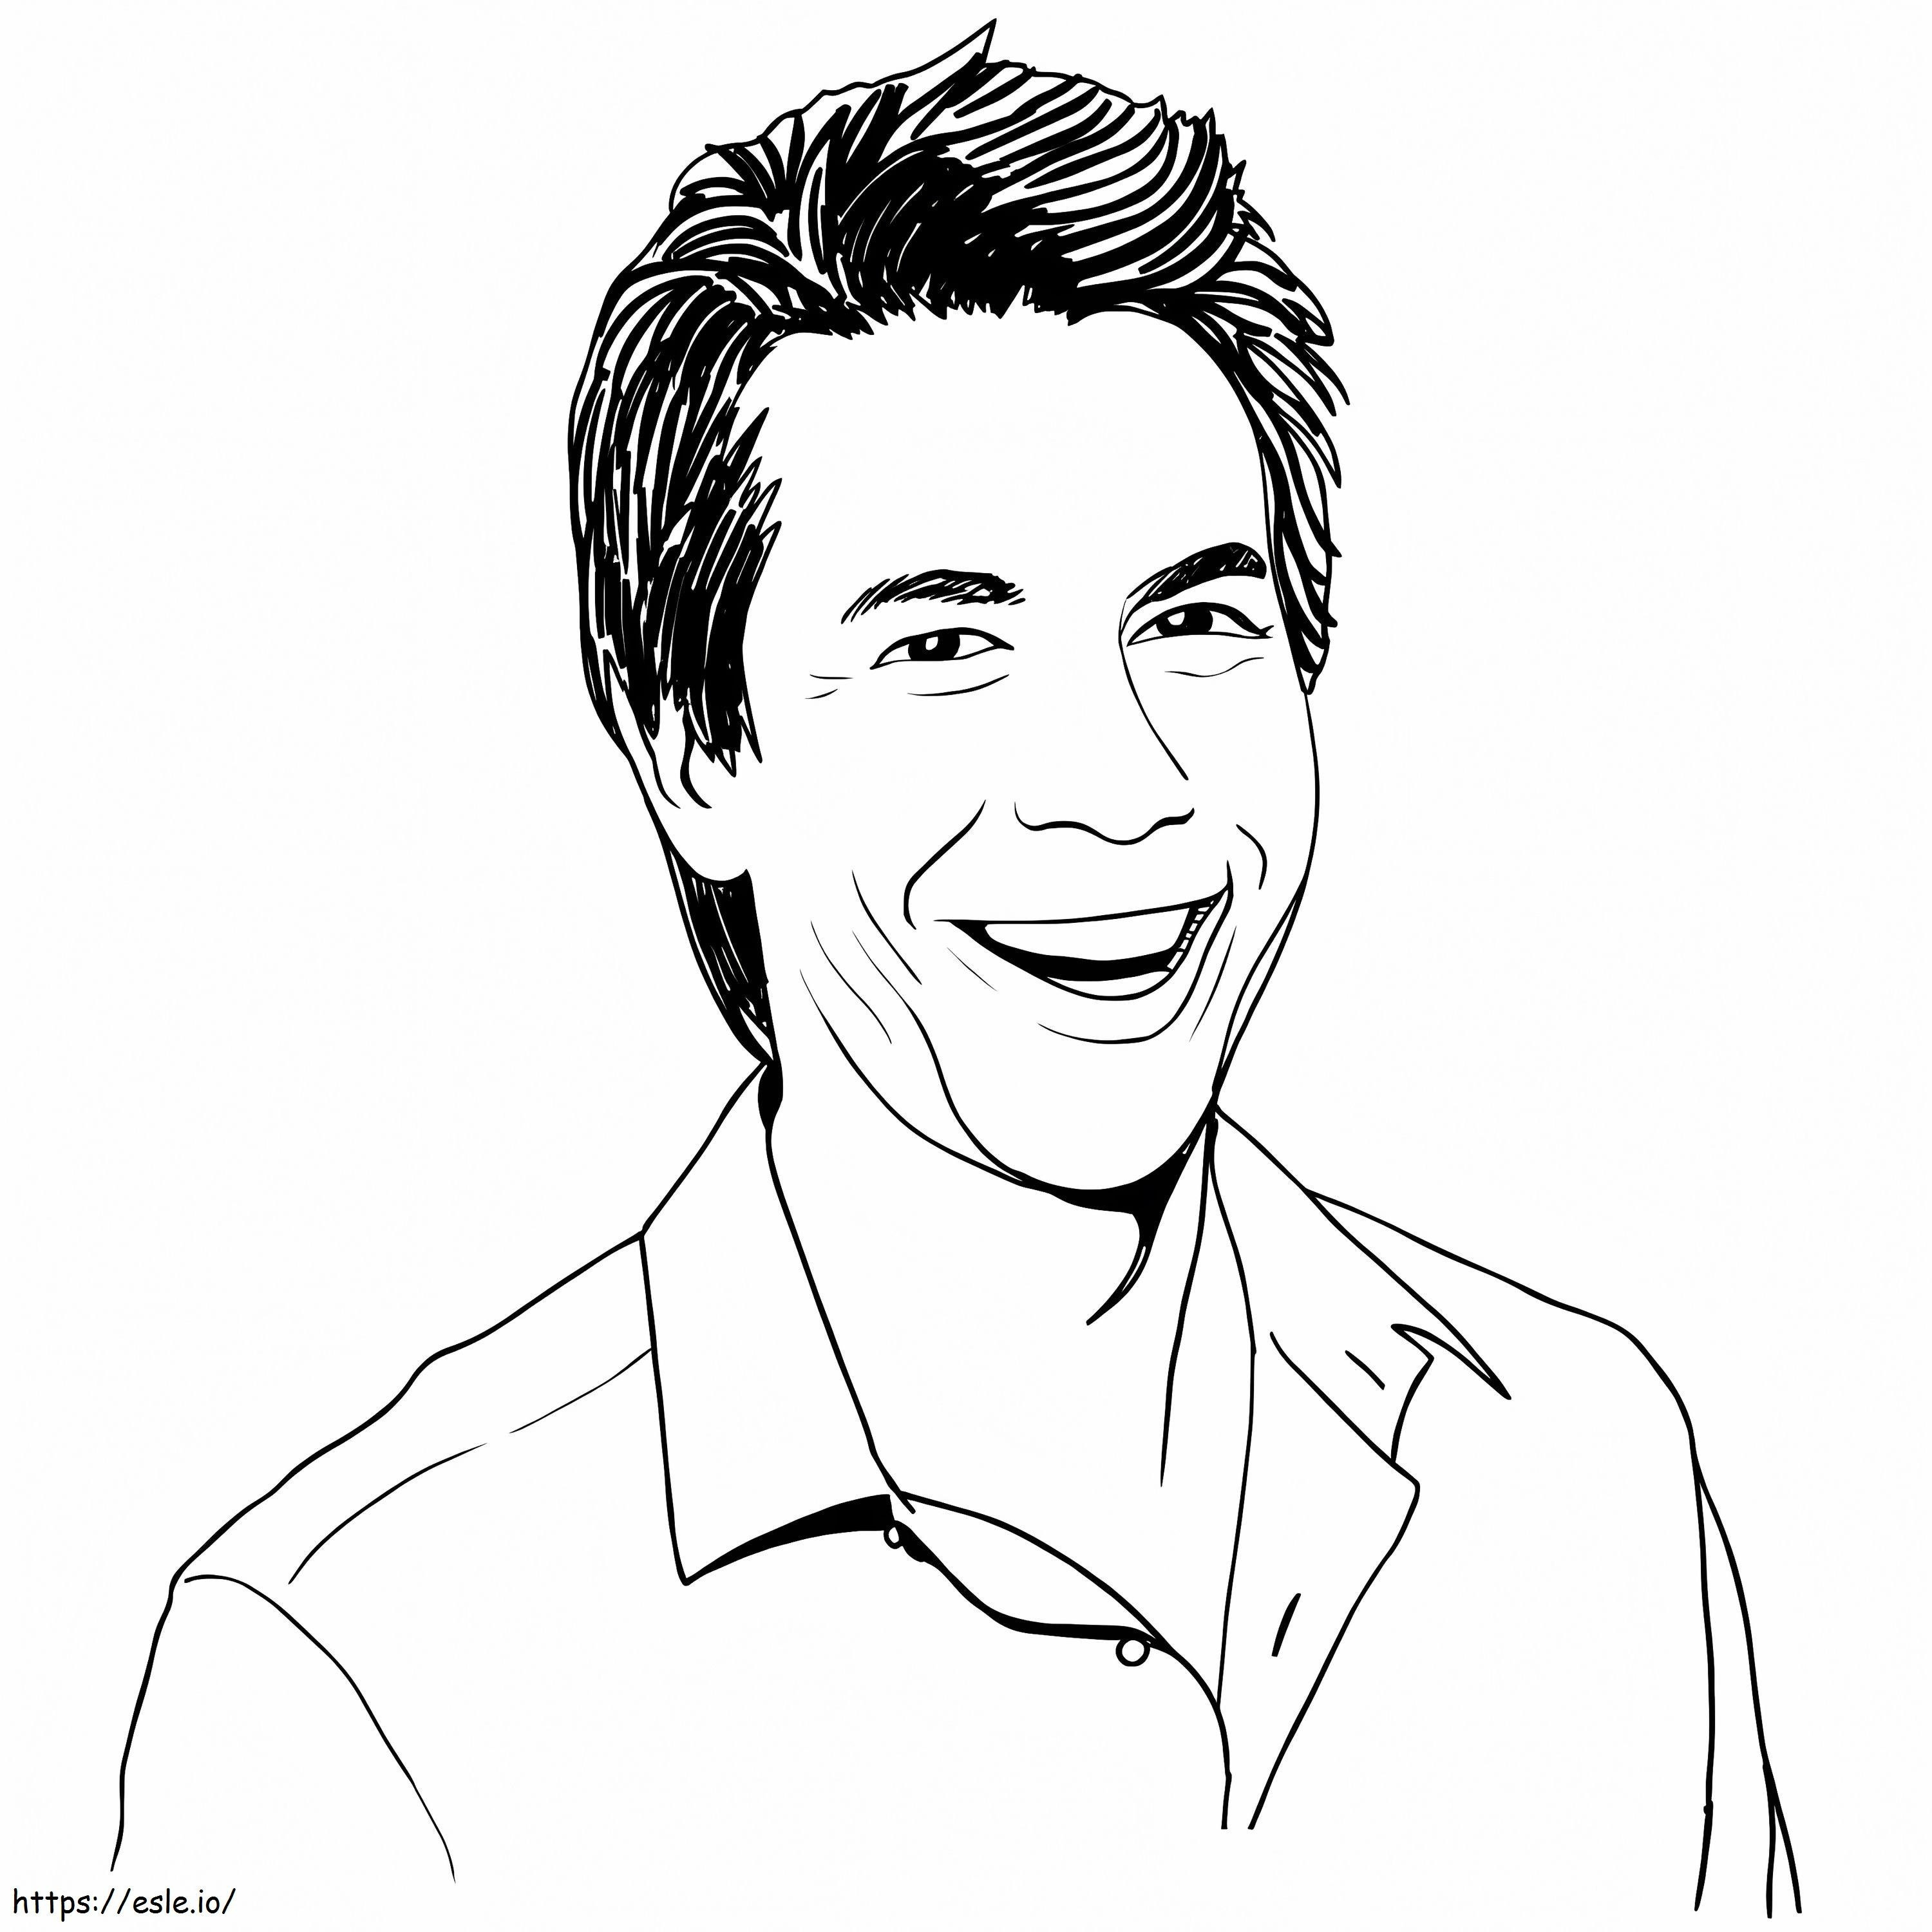 Spencer Shay From ICarly coloring page